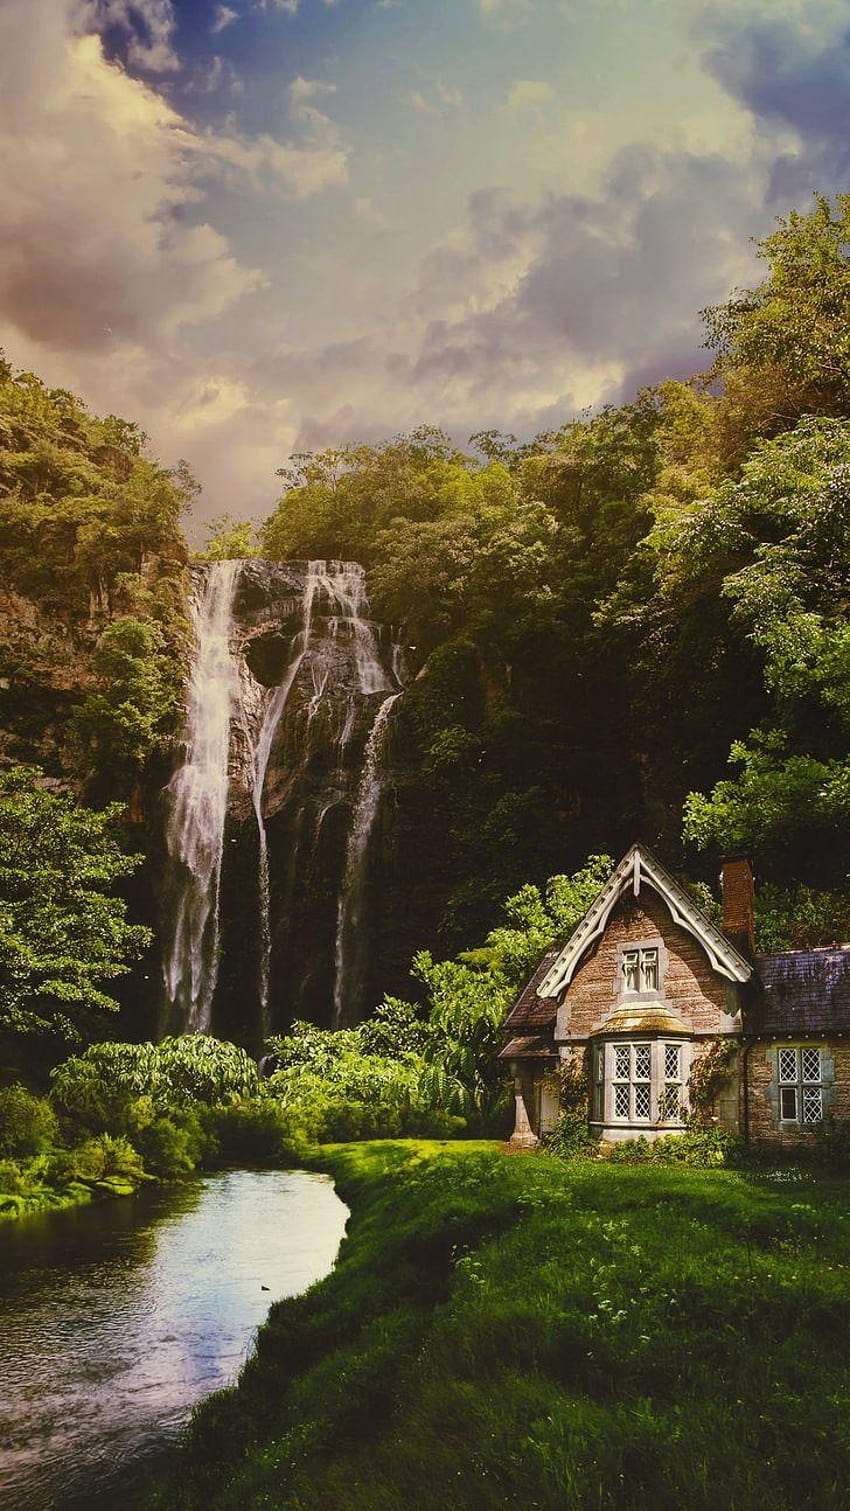 Water fall and small house in 2019, surreal waterfall iphone HD phone wallpaper